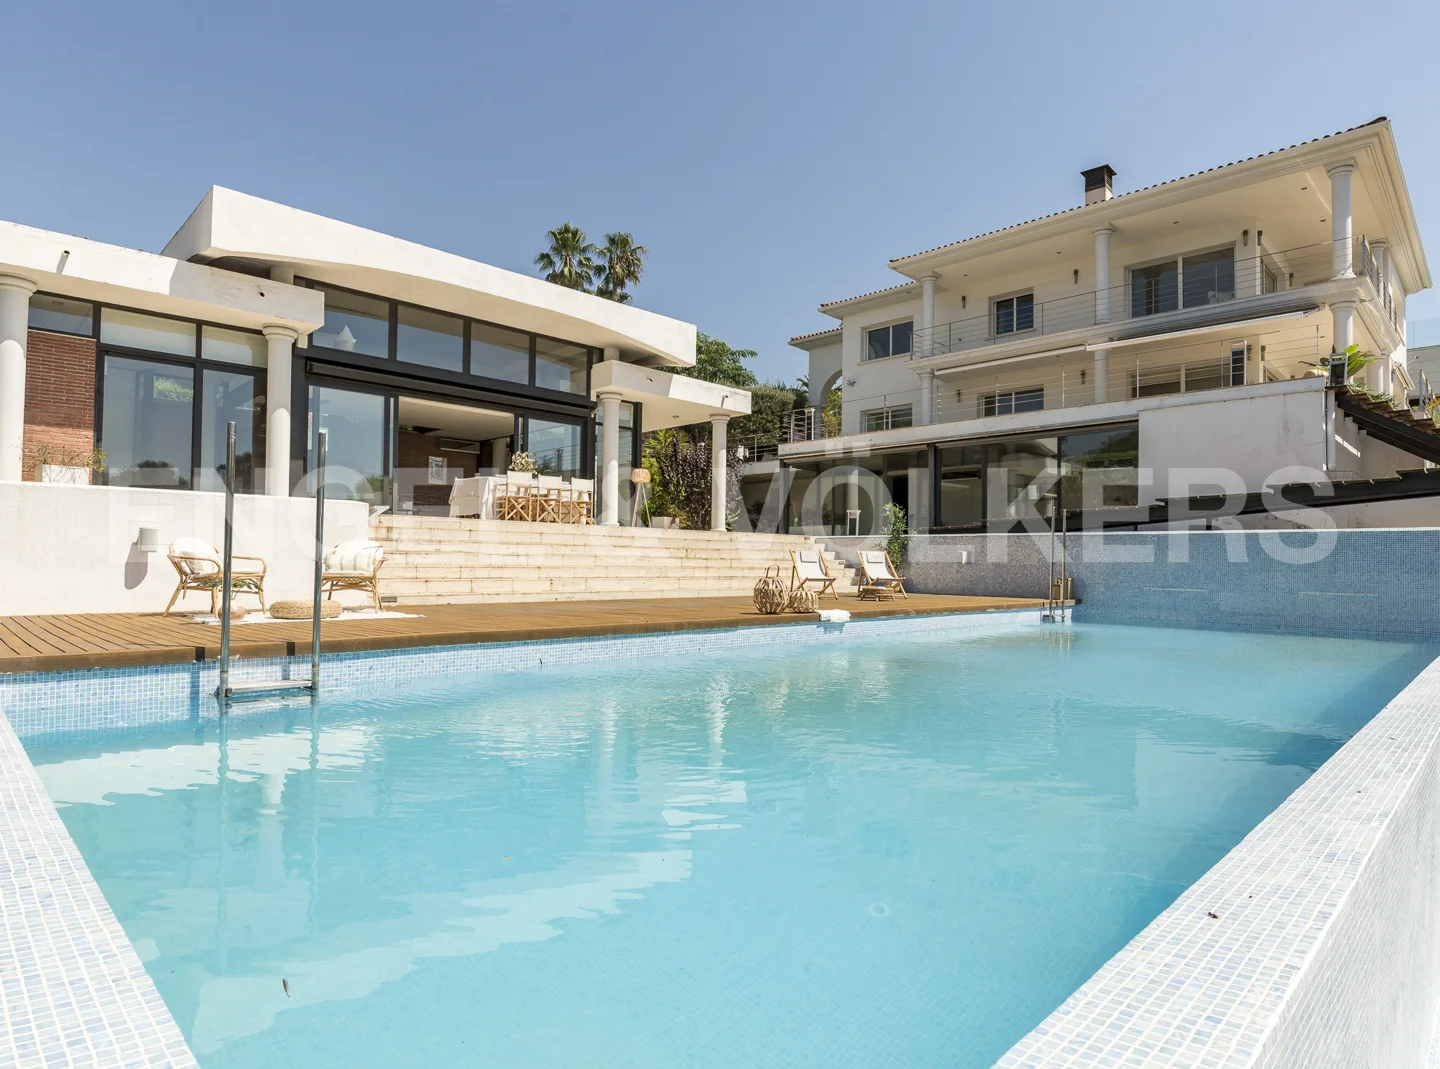 Majestic and Exclusive house, Maresme area